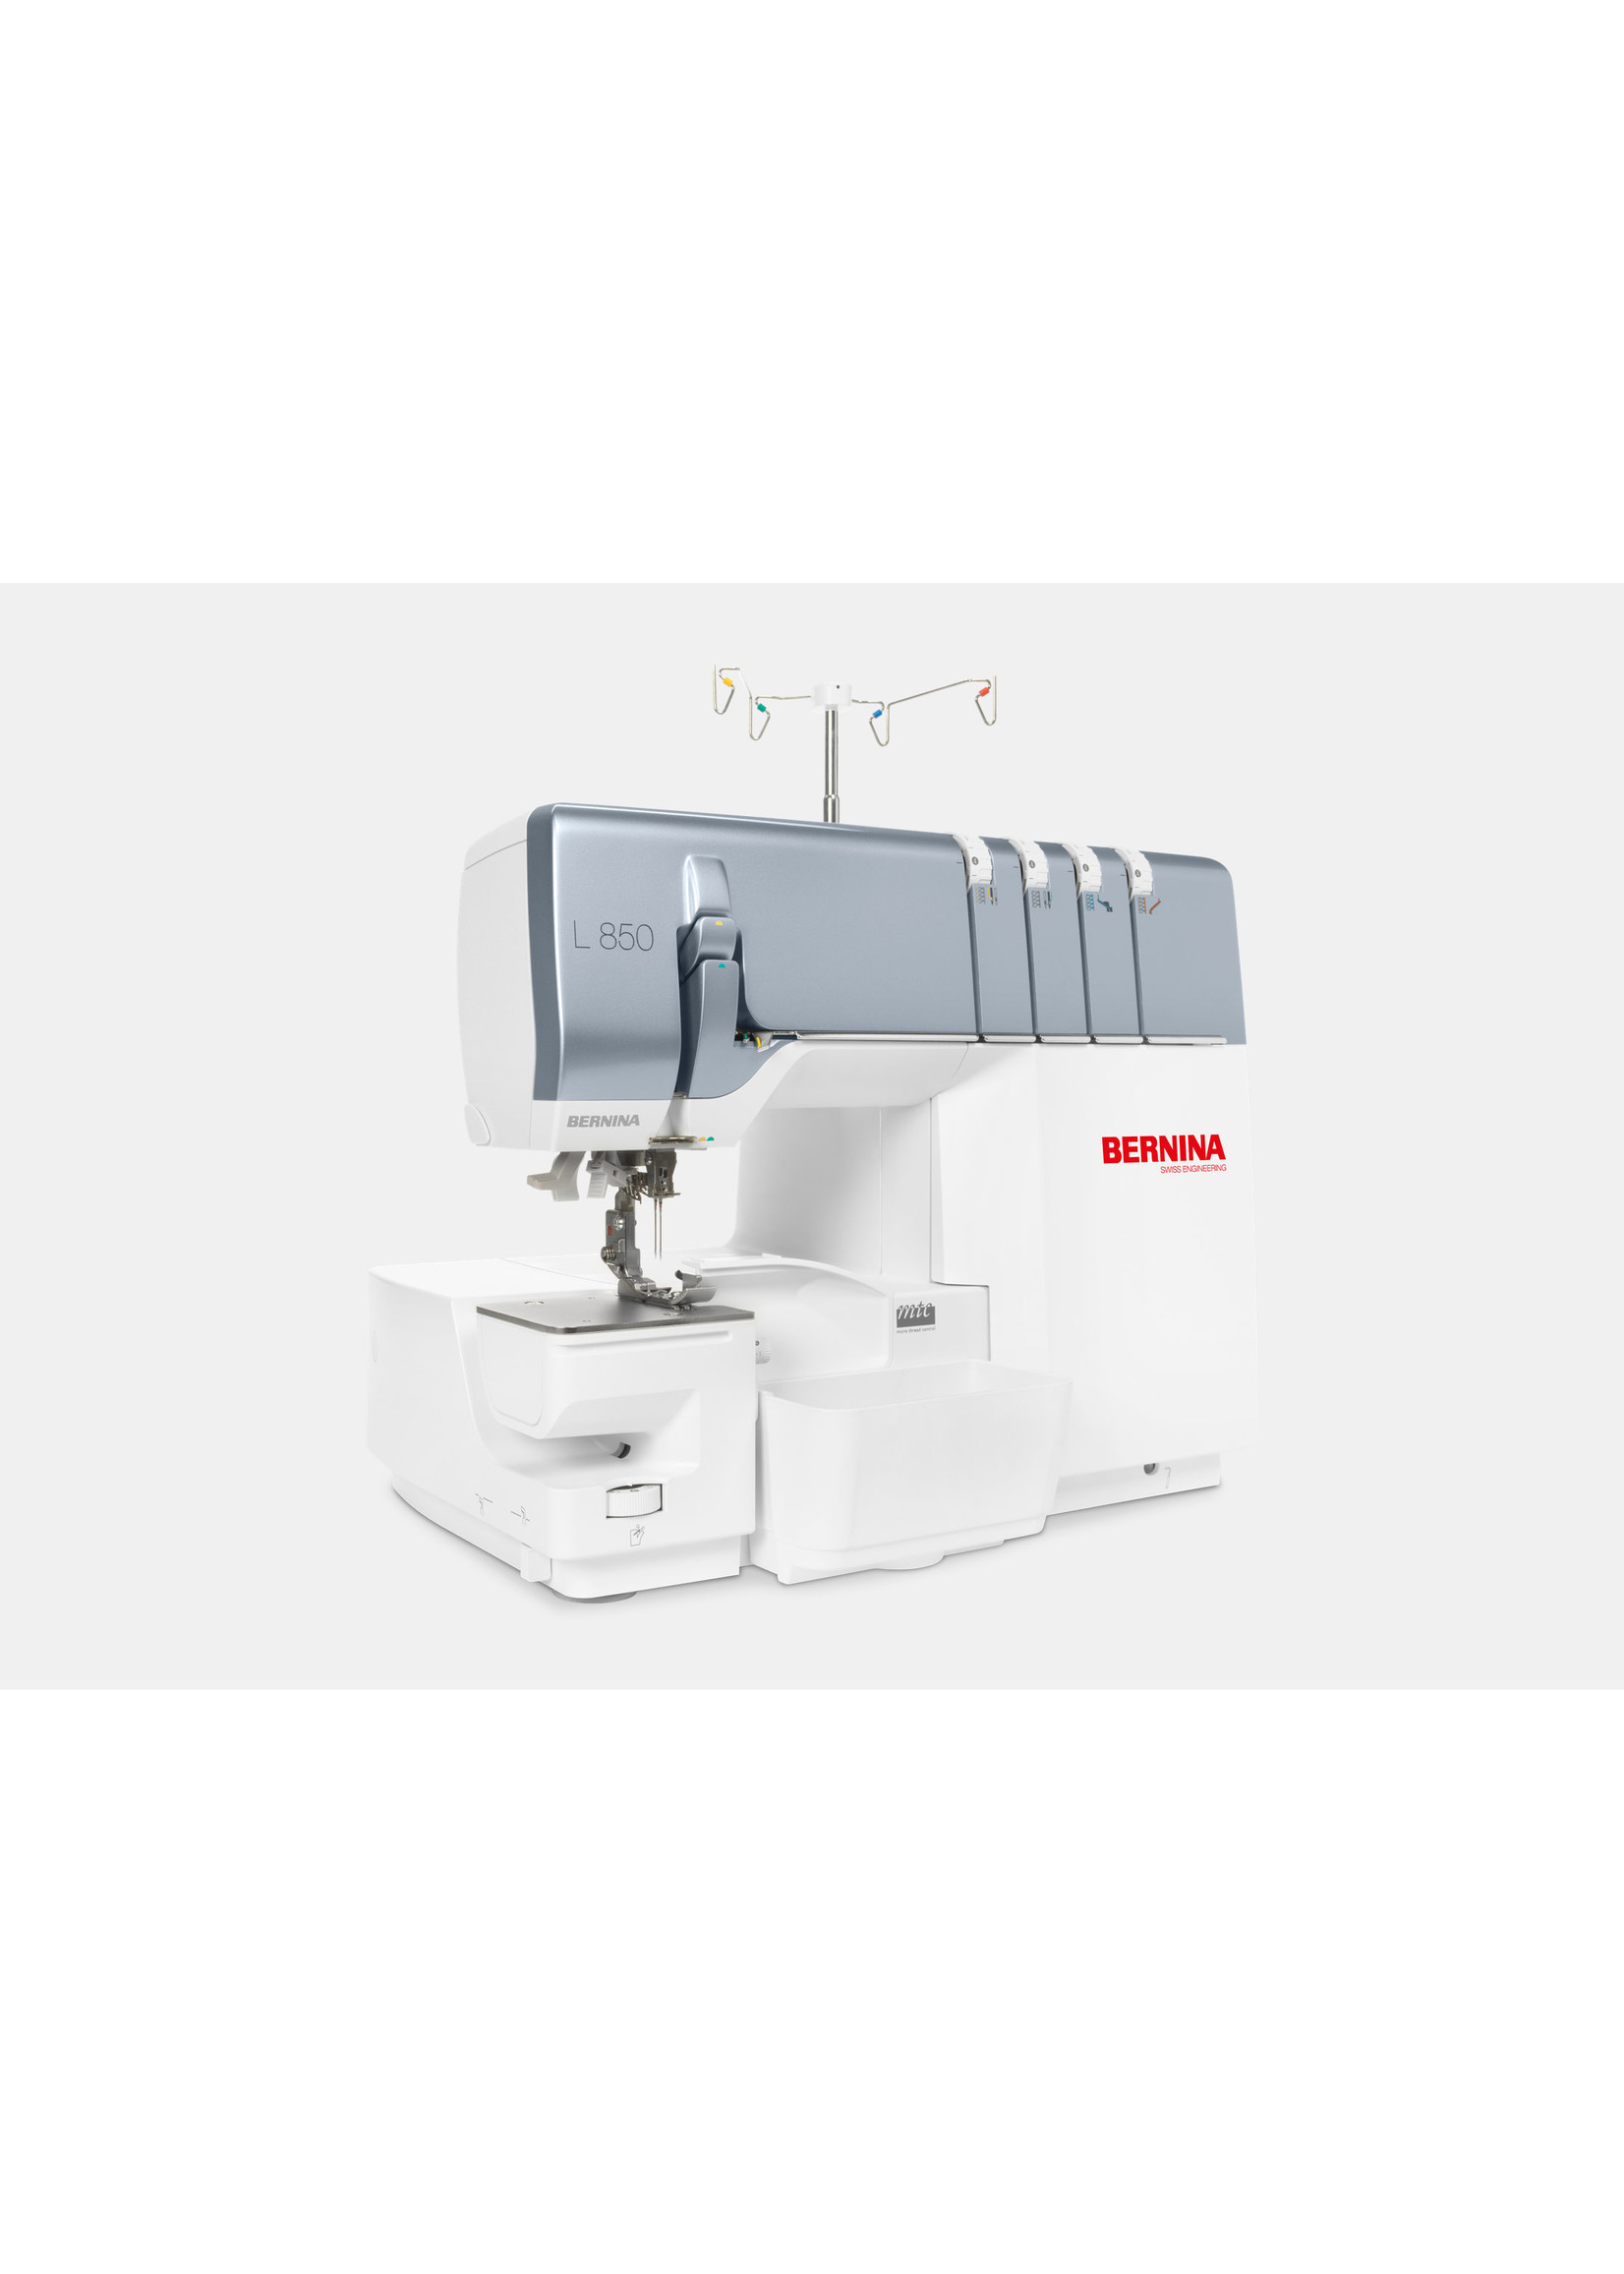 Bernina Bernina L850 Serger - AVAILABLE FOR IN-STORE PURCHASE ONLY